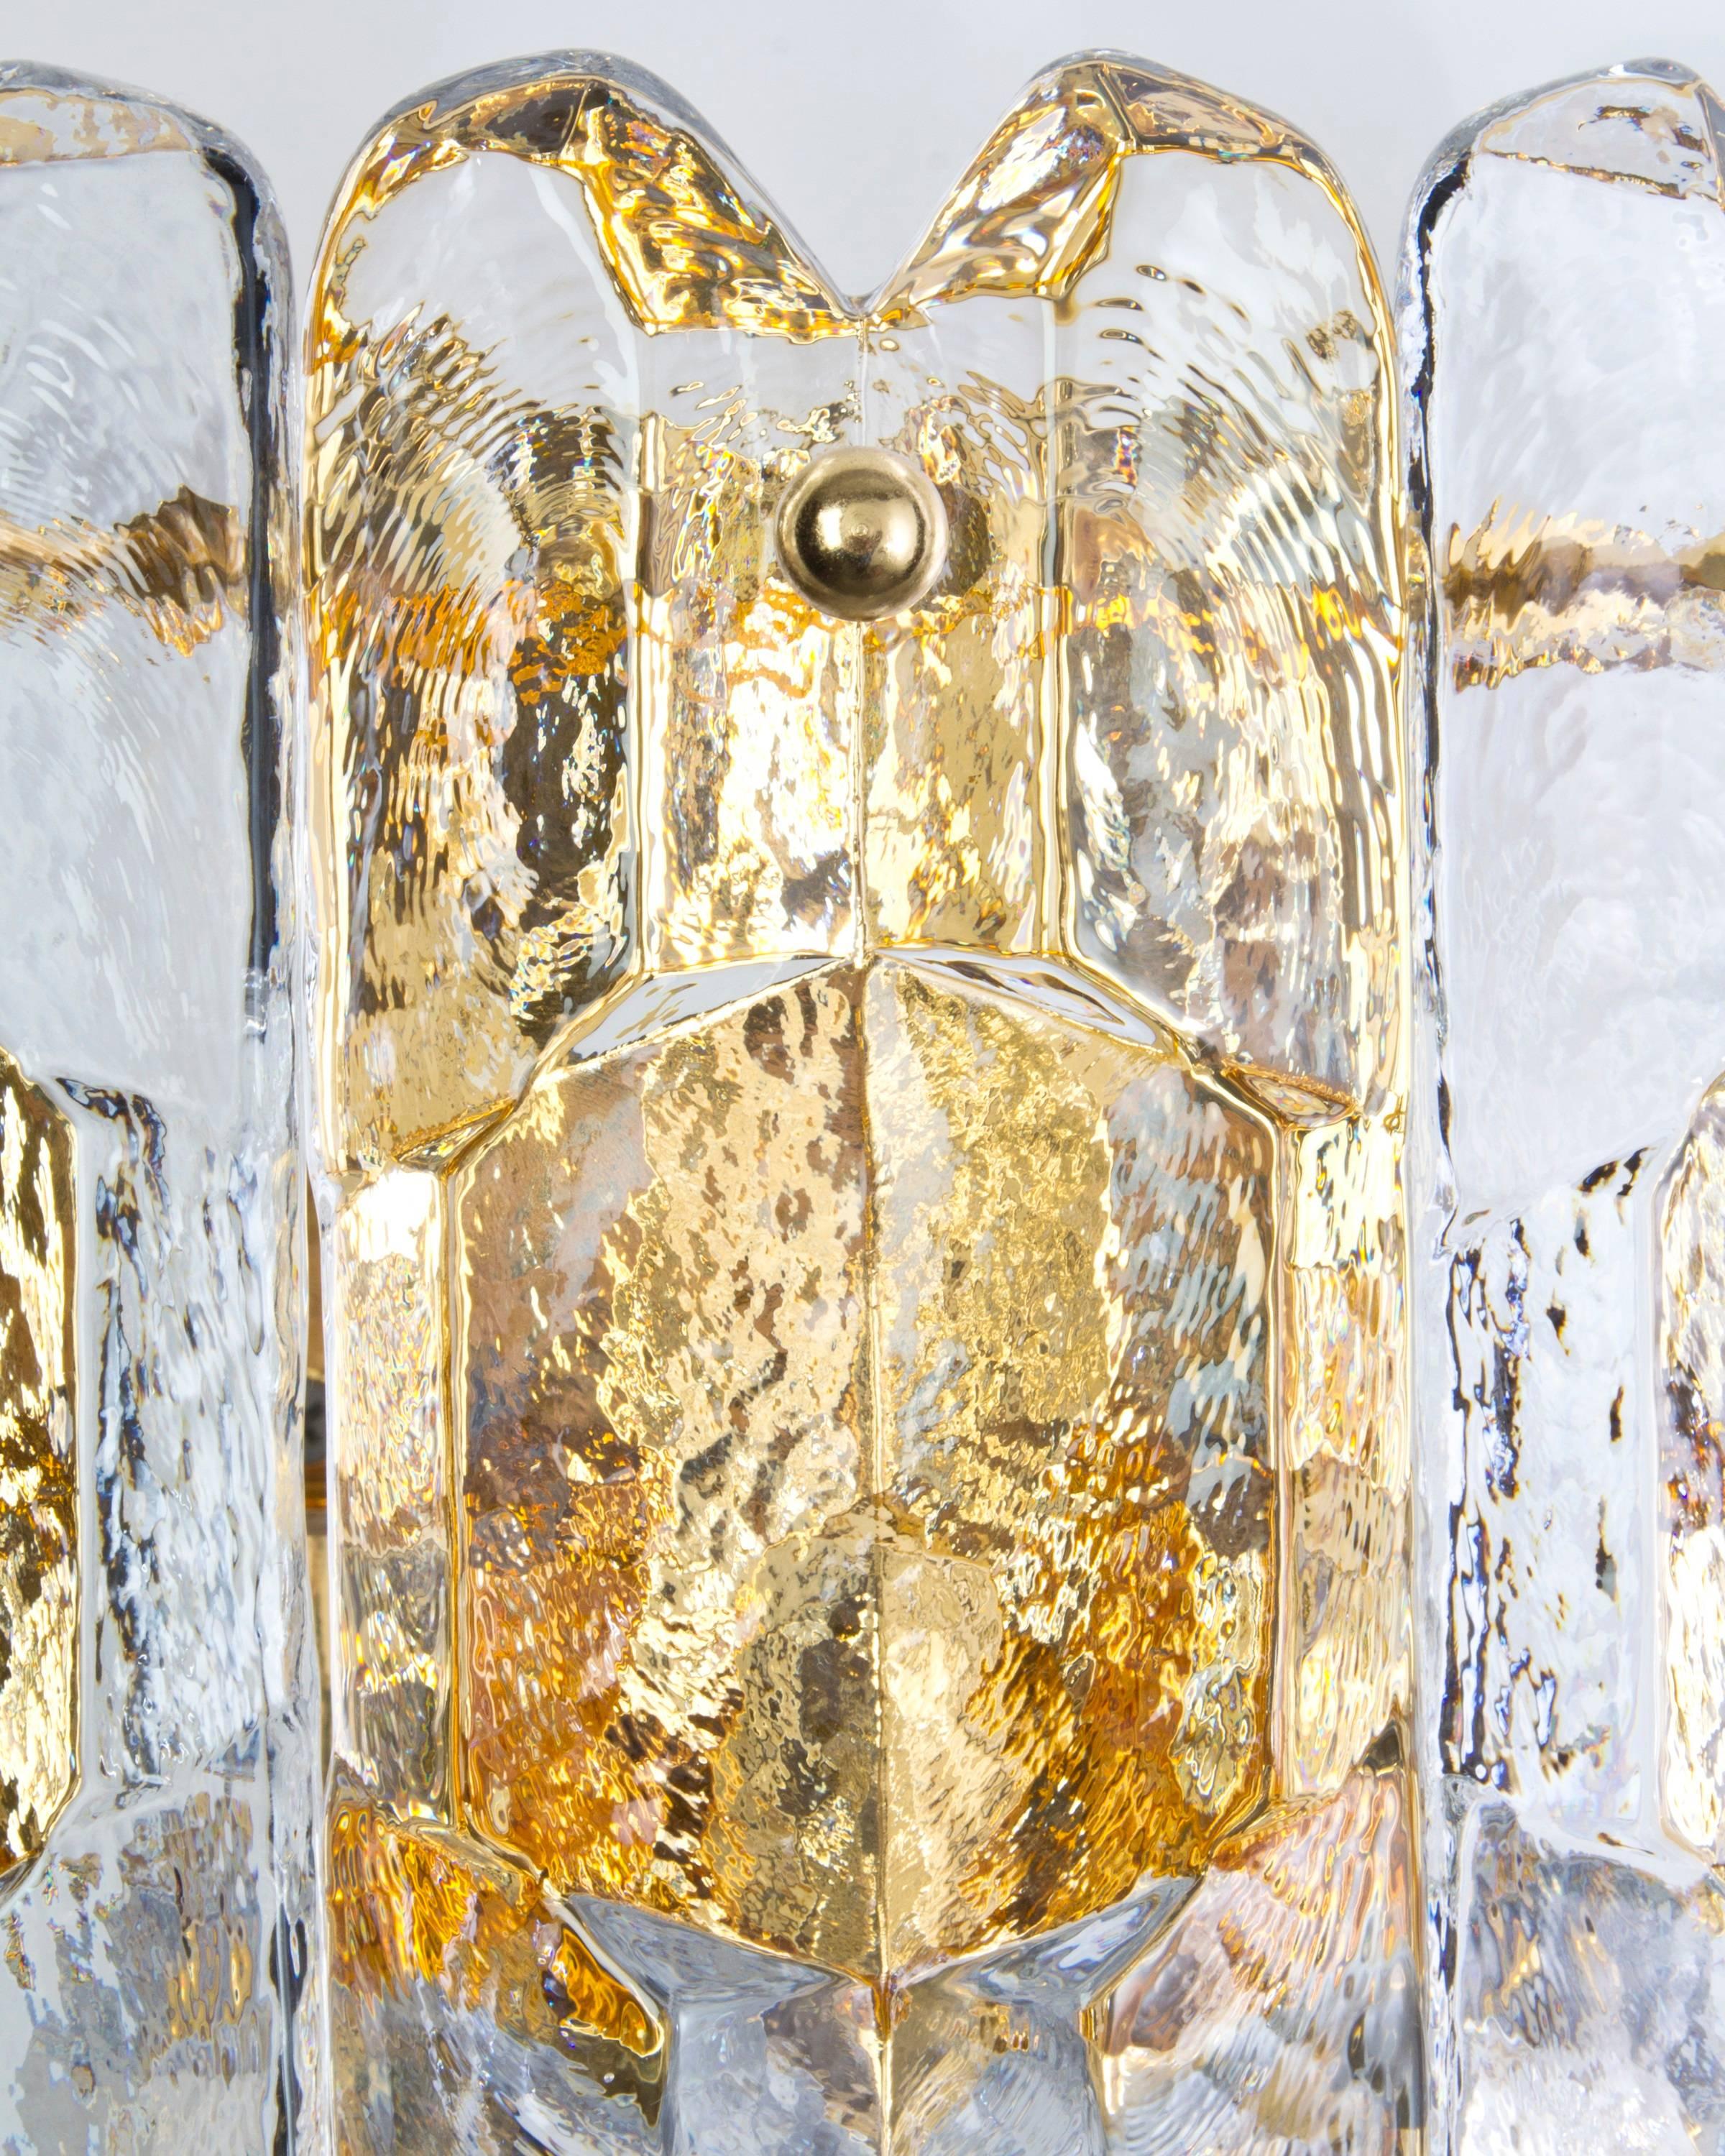 AIS2932.

A pair of vintage sconces having gilded metalwork dressed with ice style prisms. Signed by the Austrian glassmaker Kalmar. Due to the antique nature of this fixture, there may be some nicks or imperfections in the glass as well as